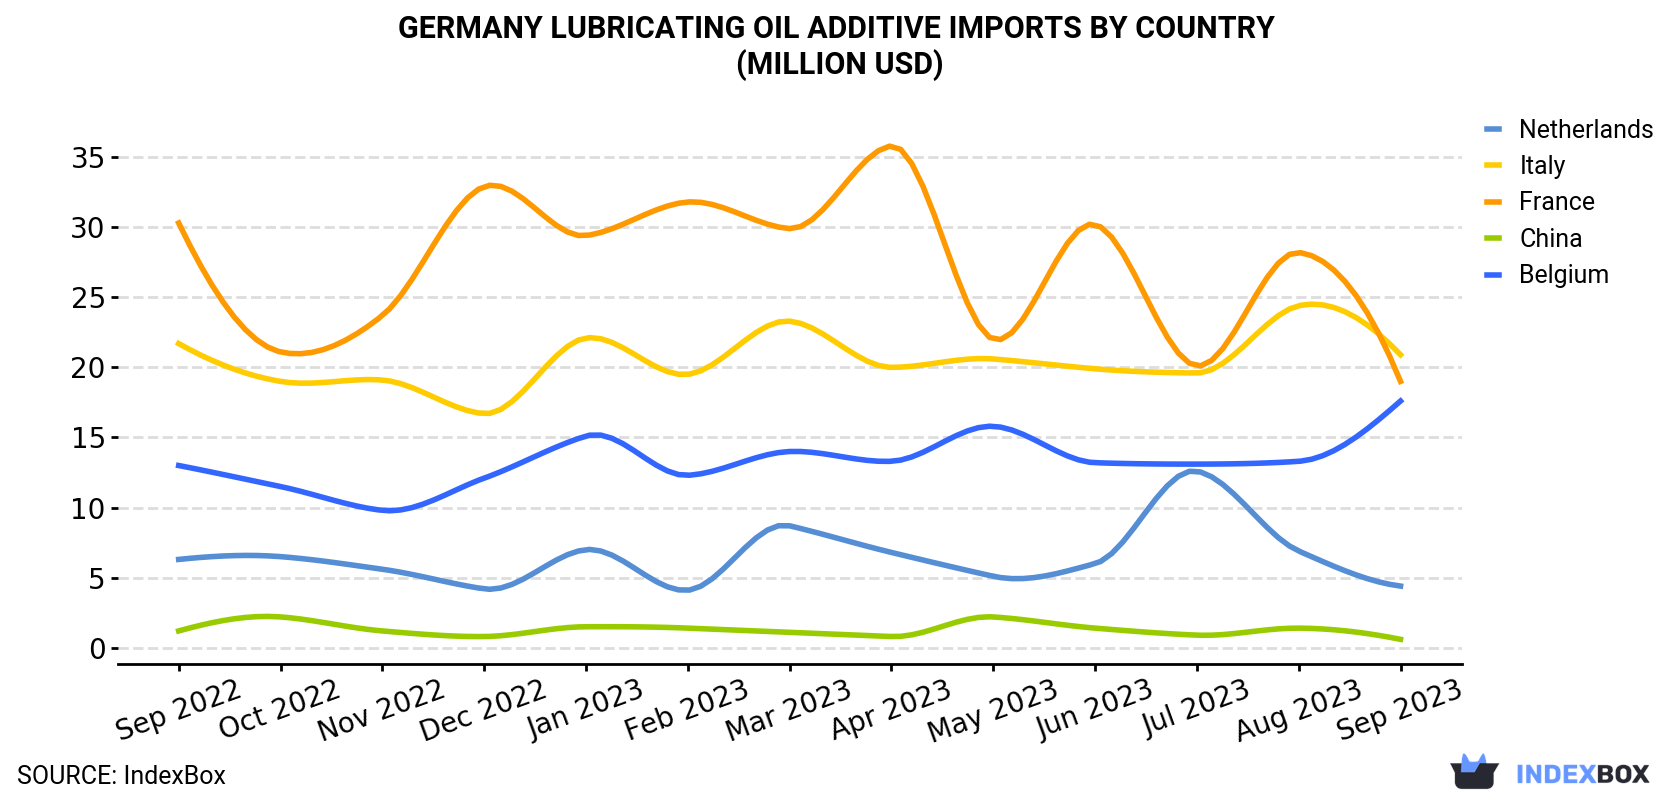 Germany Lubricating Oil Additive Imports By Country (Million USD)